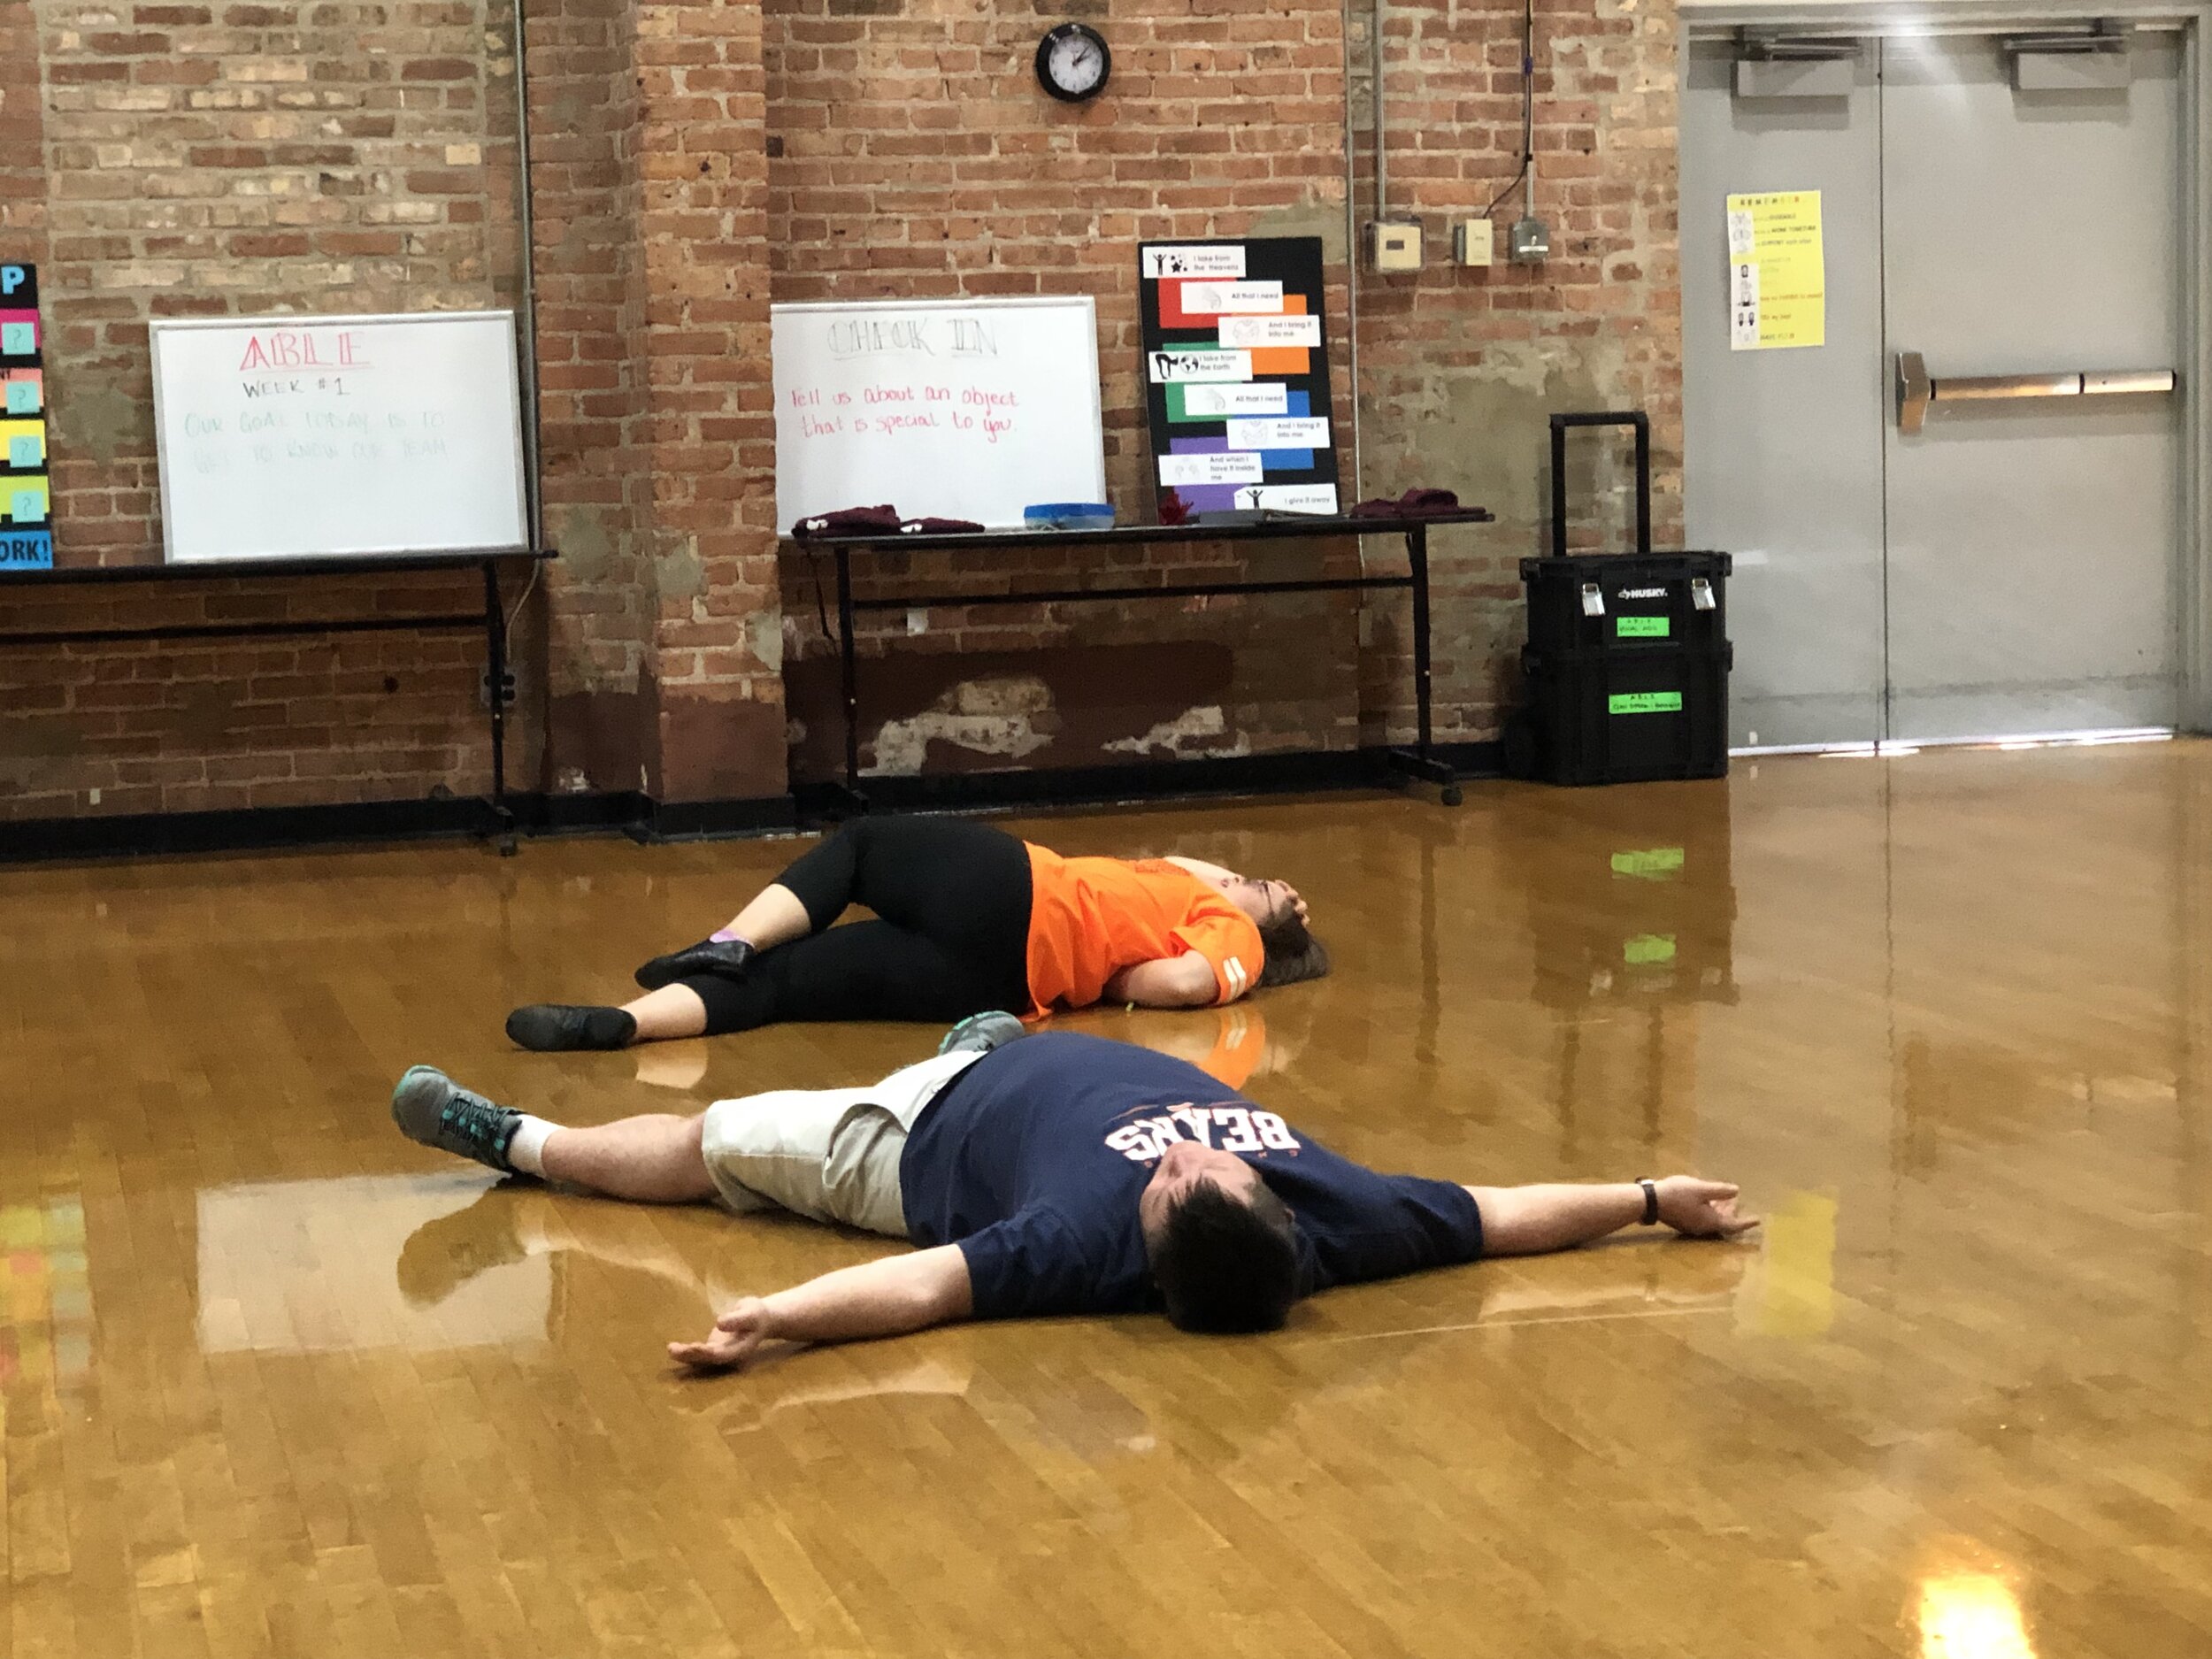 Emily and Matthew lay on the floor after a failed swimming attempt in their scene